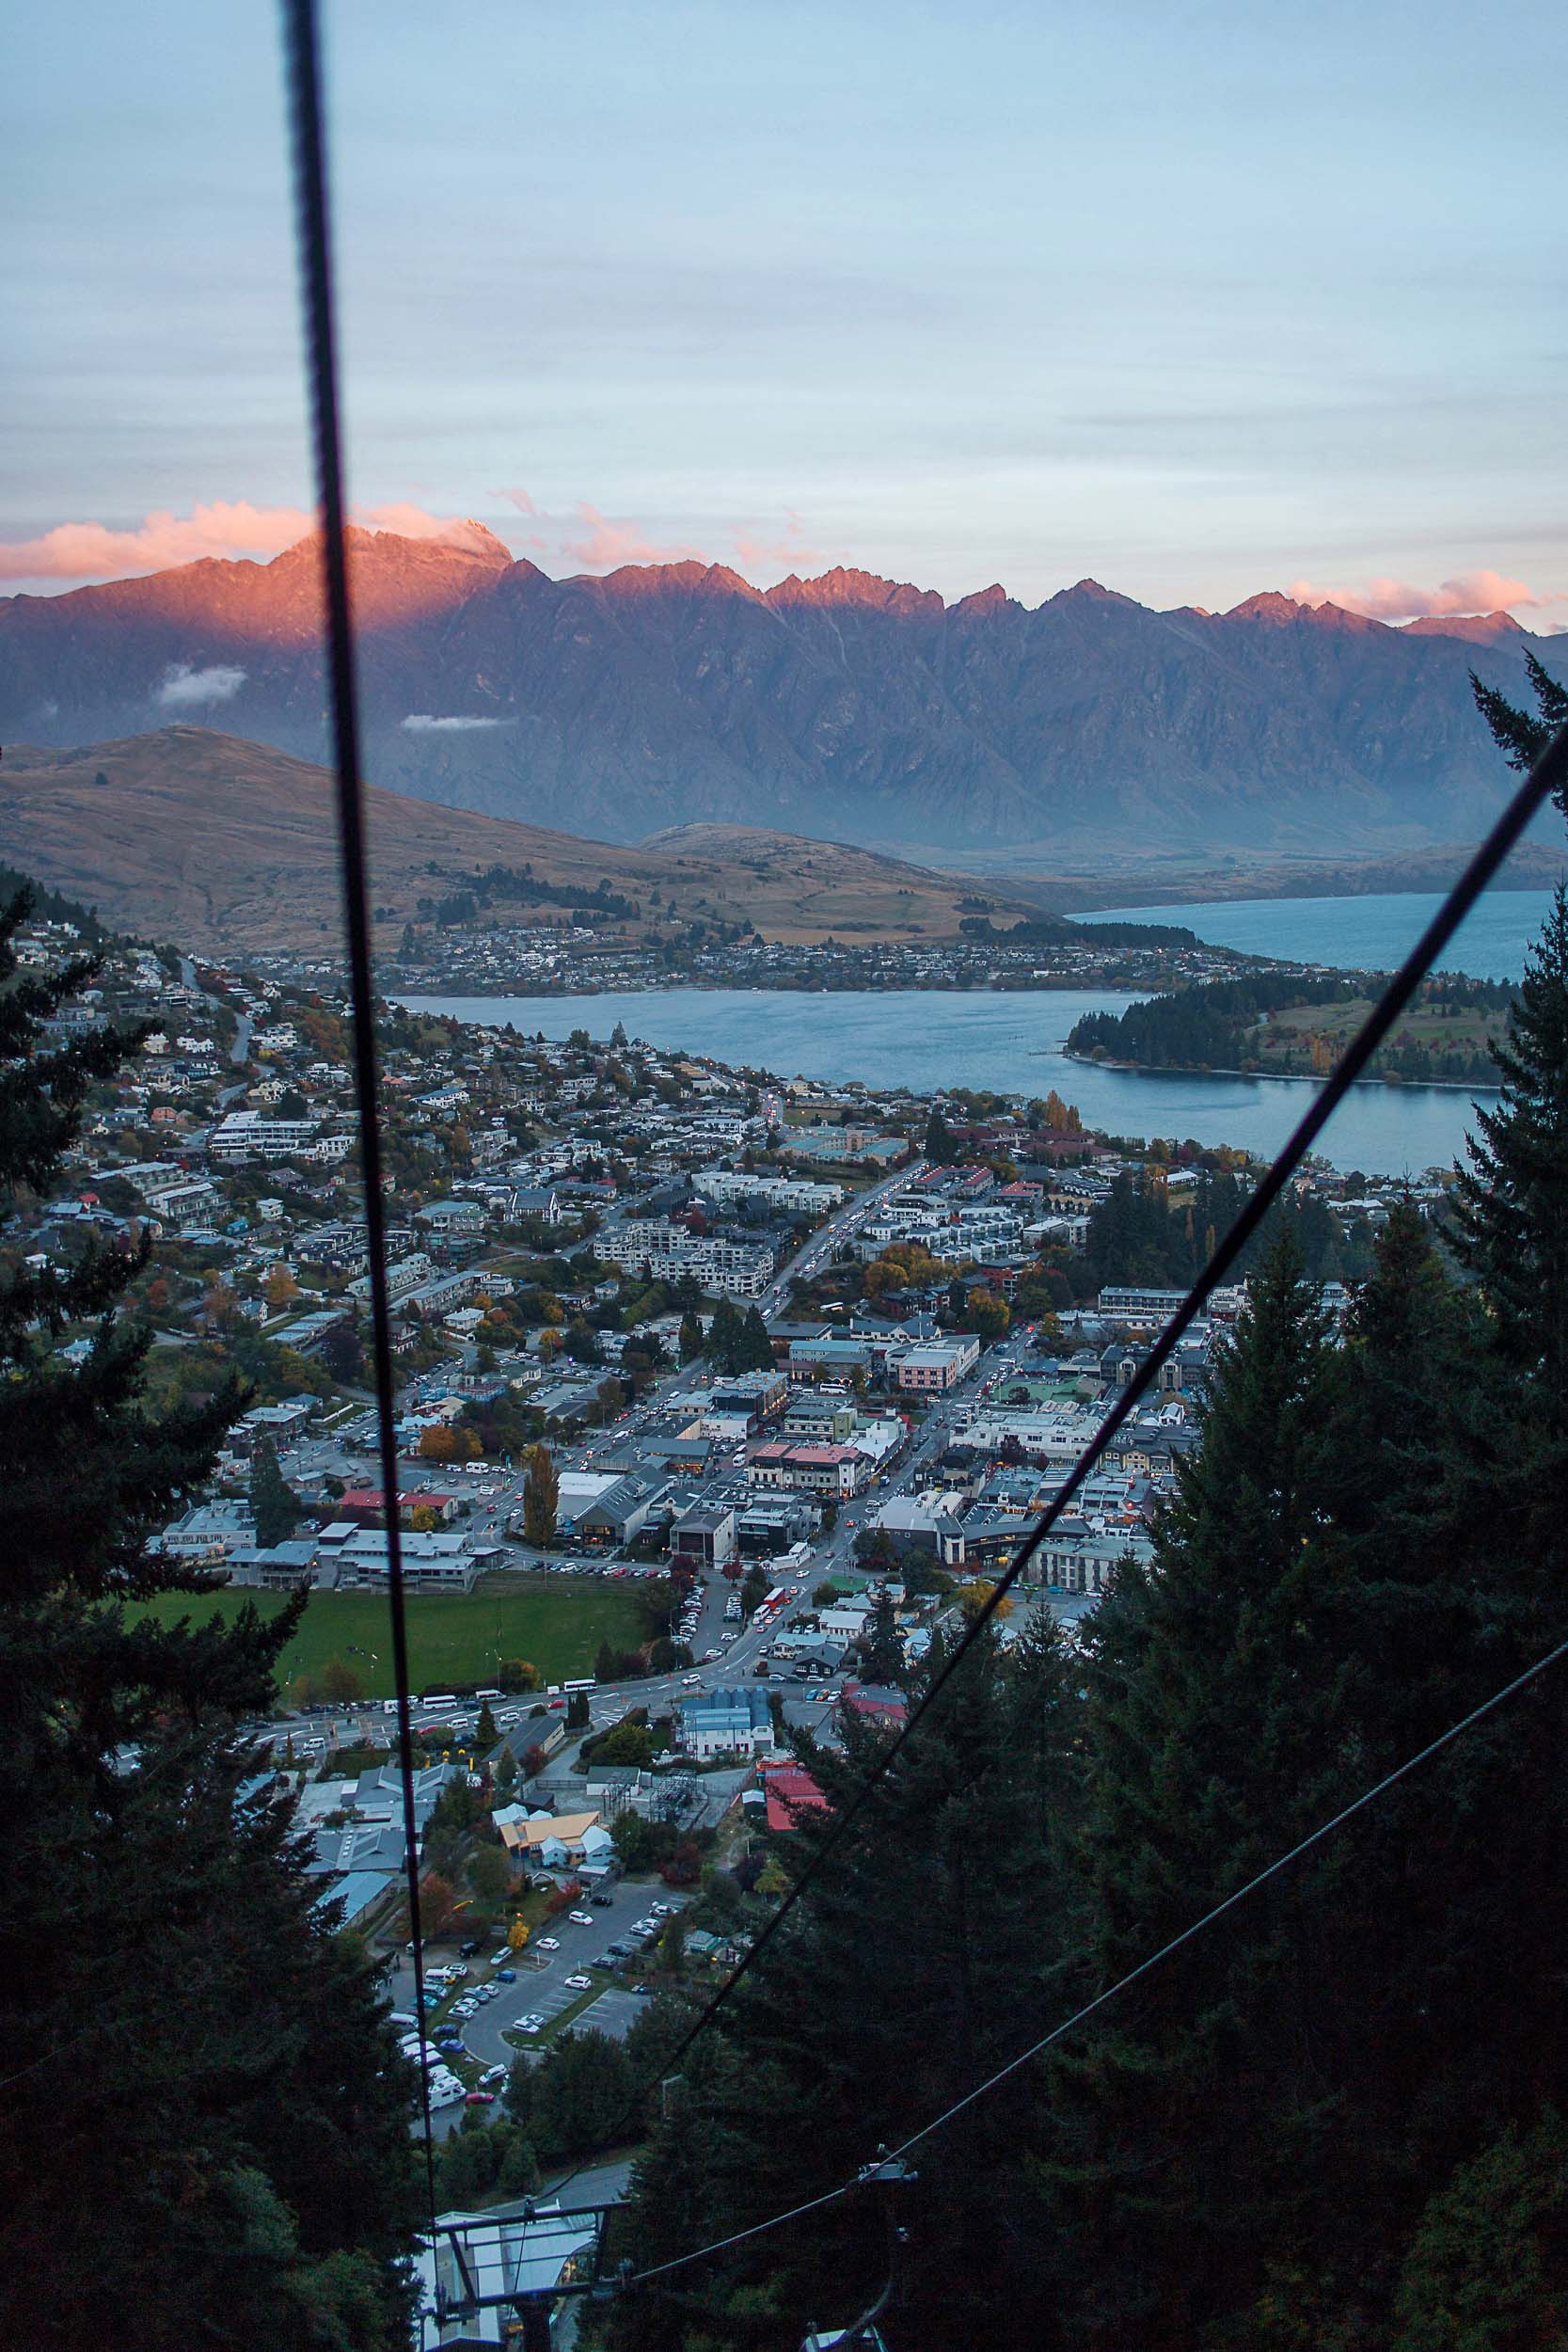 Sunset views of Queenstown coming down from the Skyline gondola